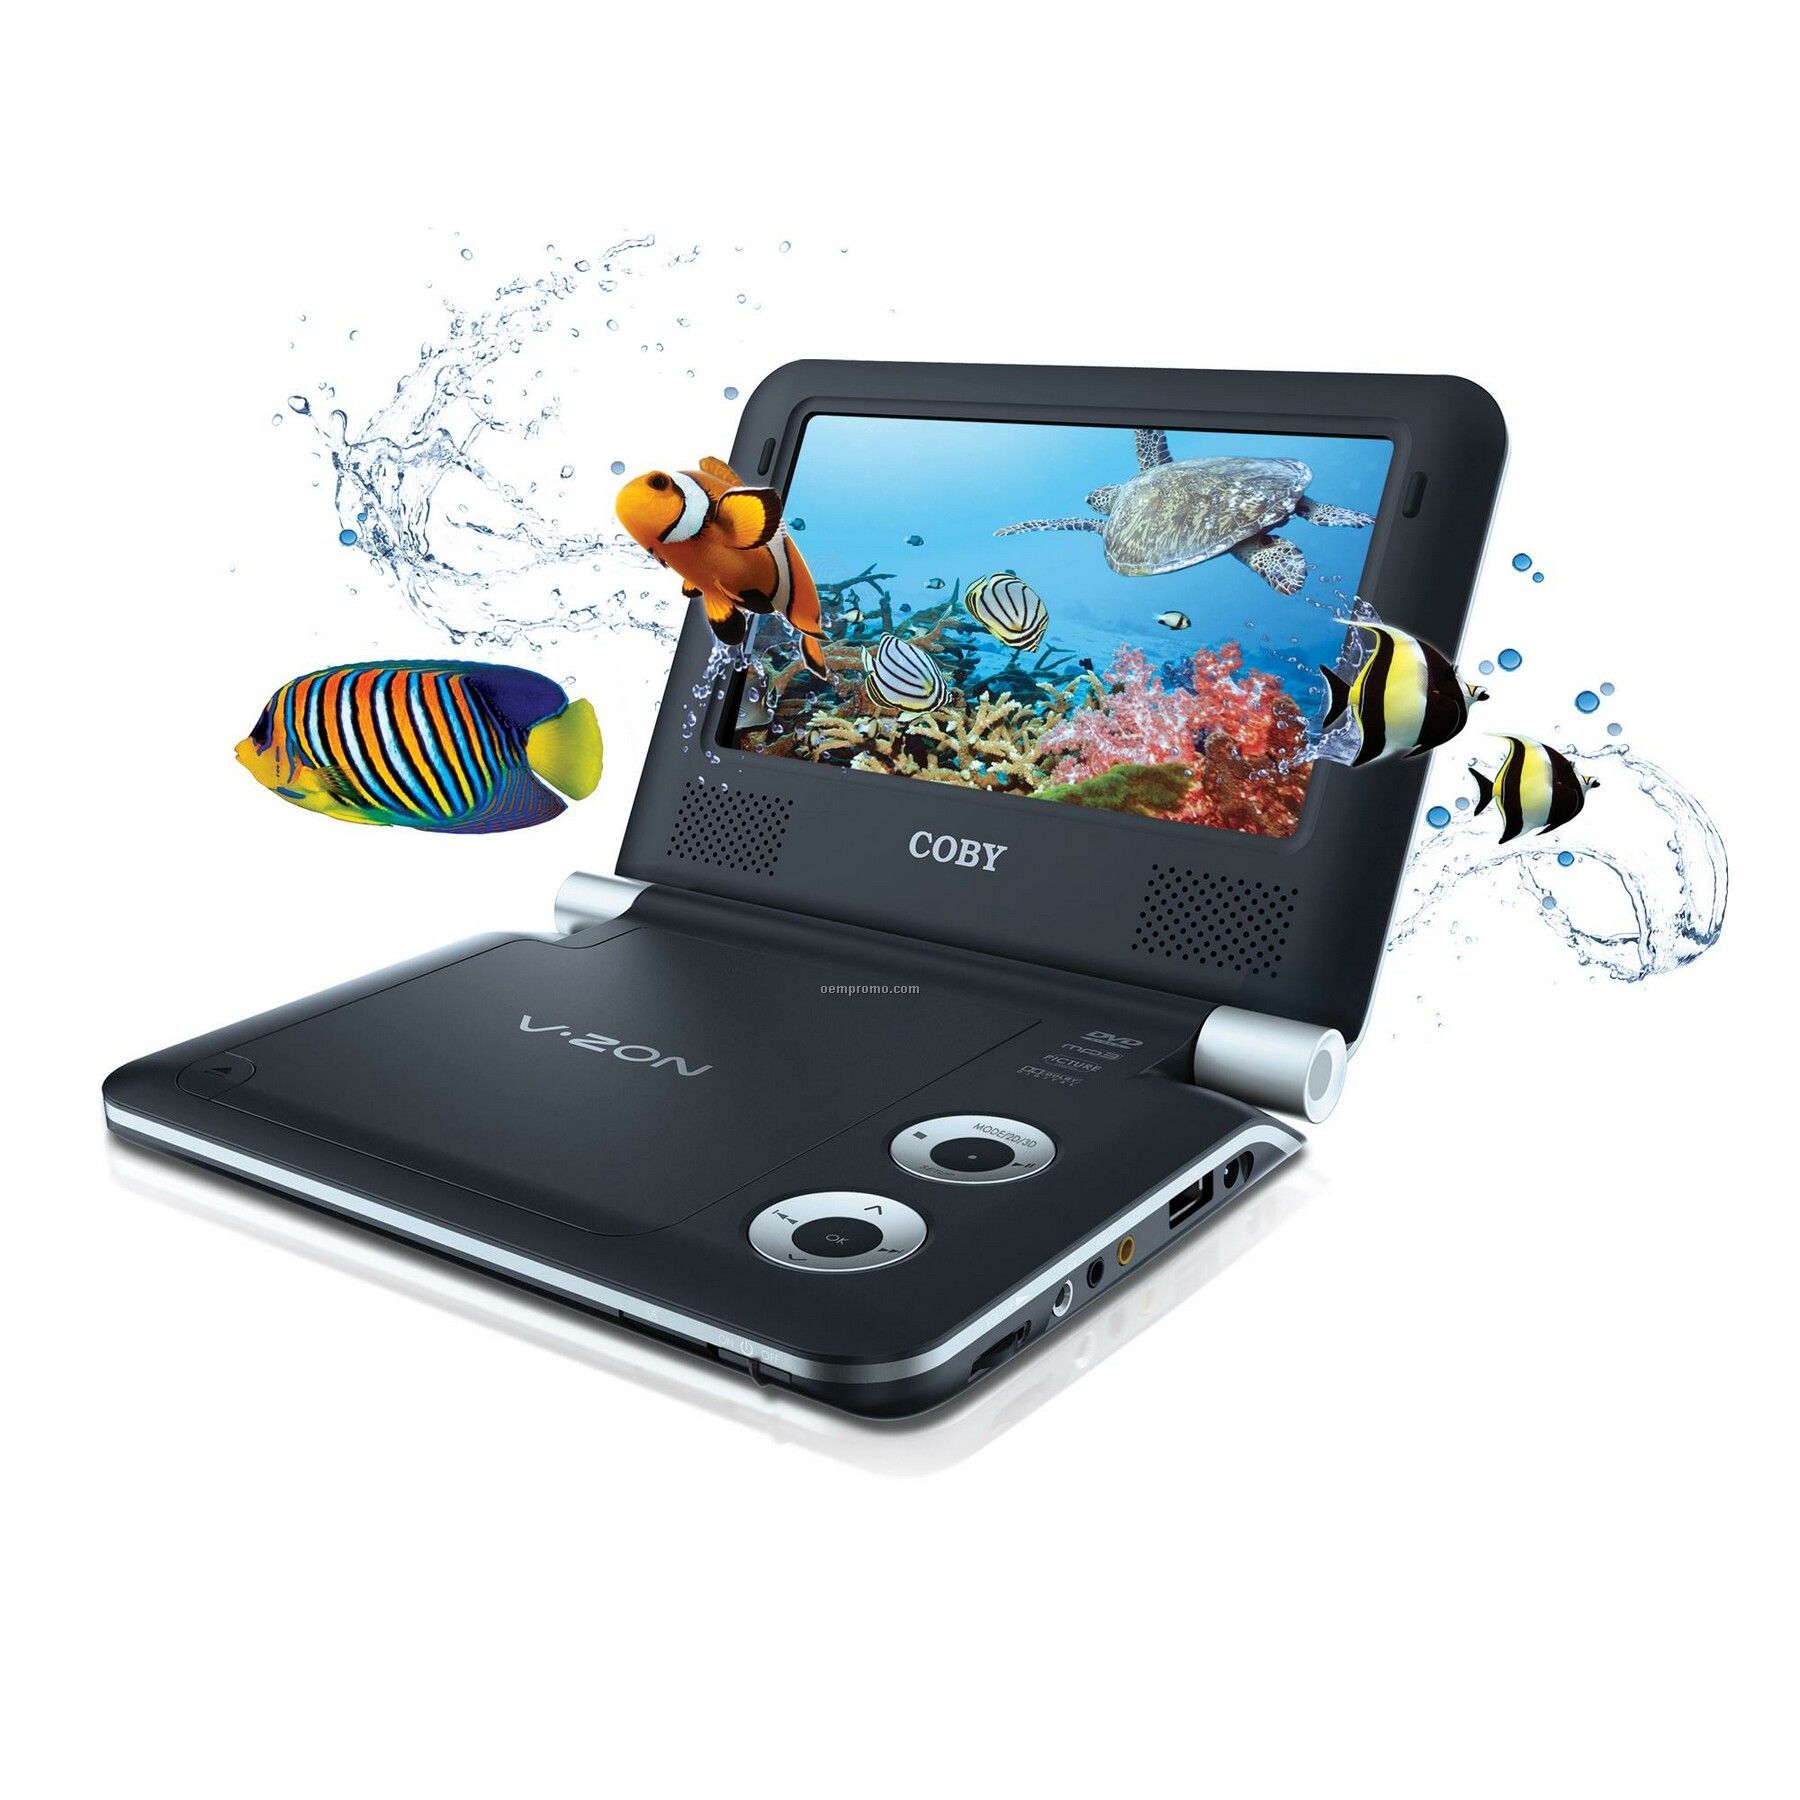   Players on 3d Dvd Cd Mp3 Player China Wholesale 7  Portable 3d Dvd Cd Mp3 Player